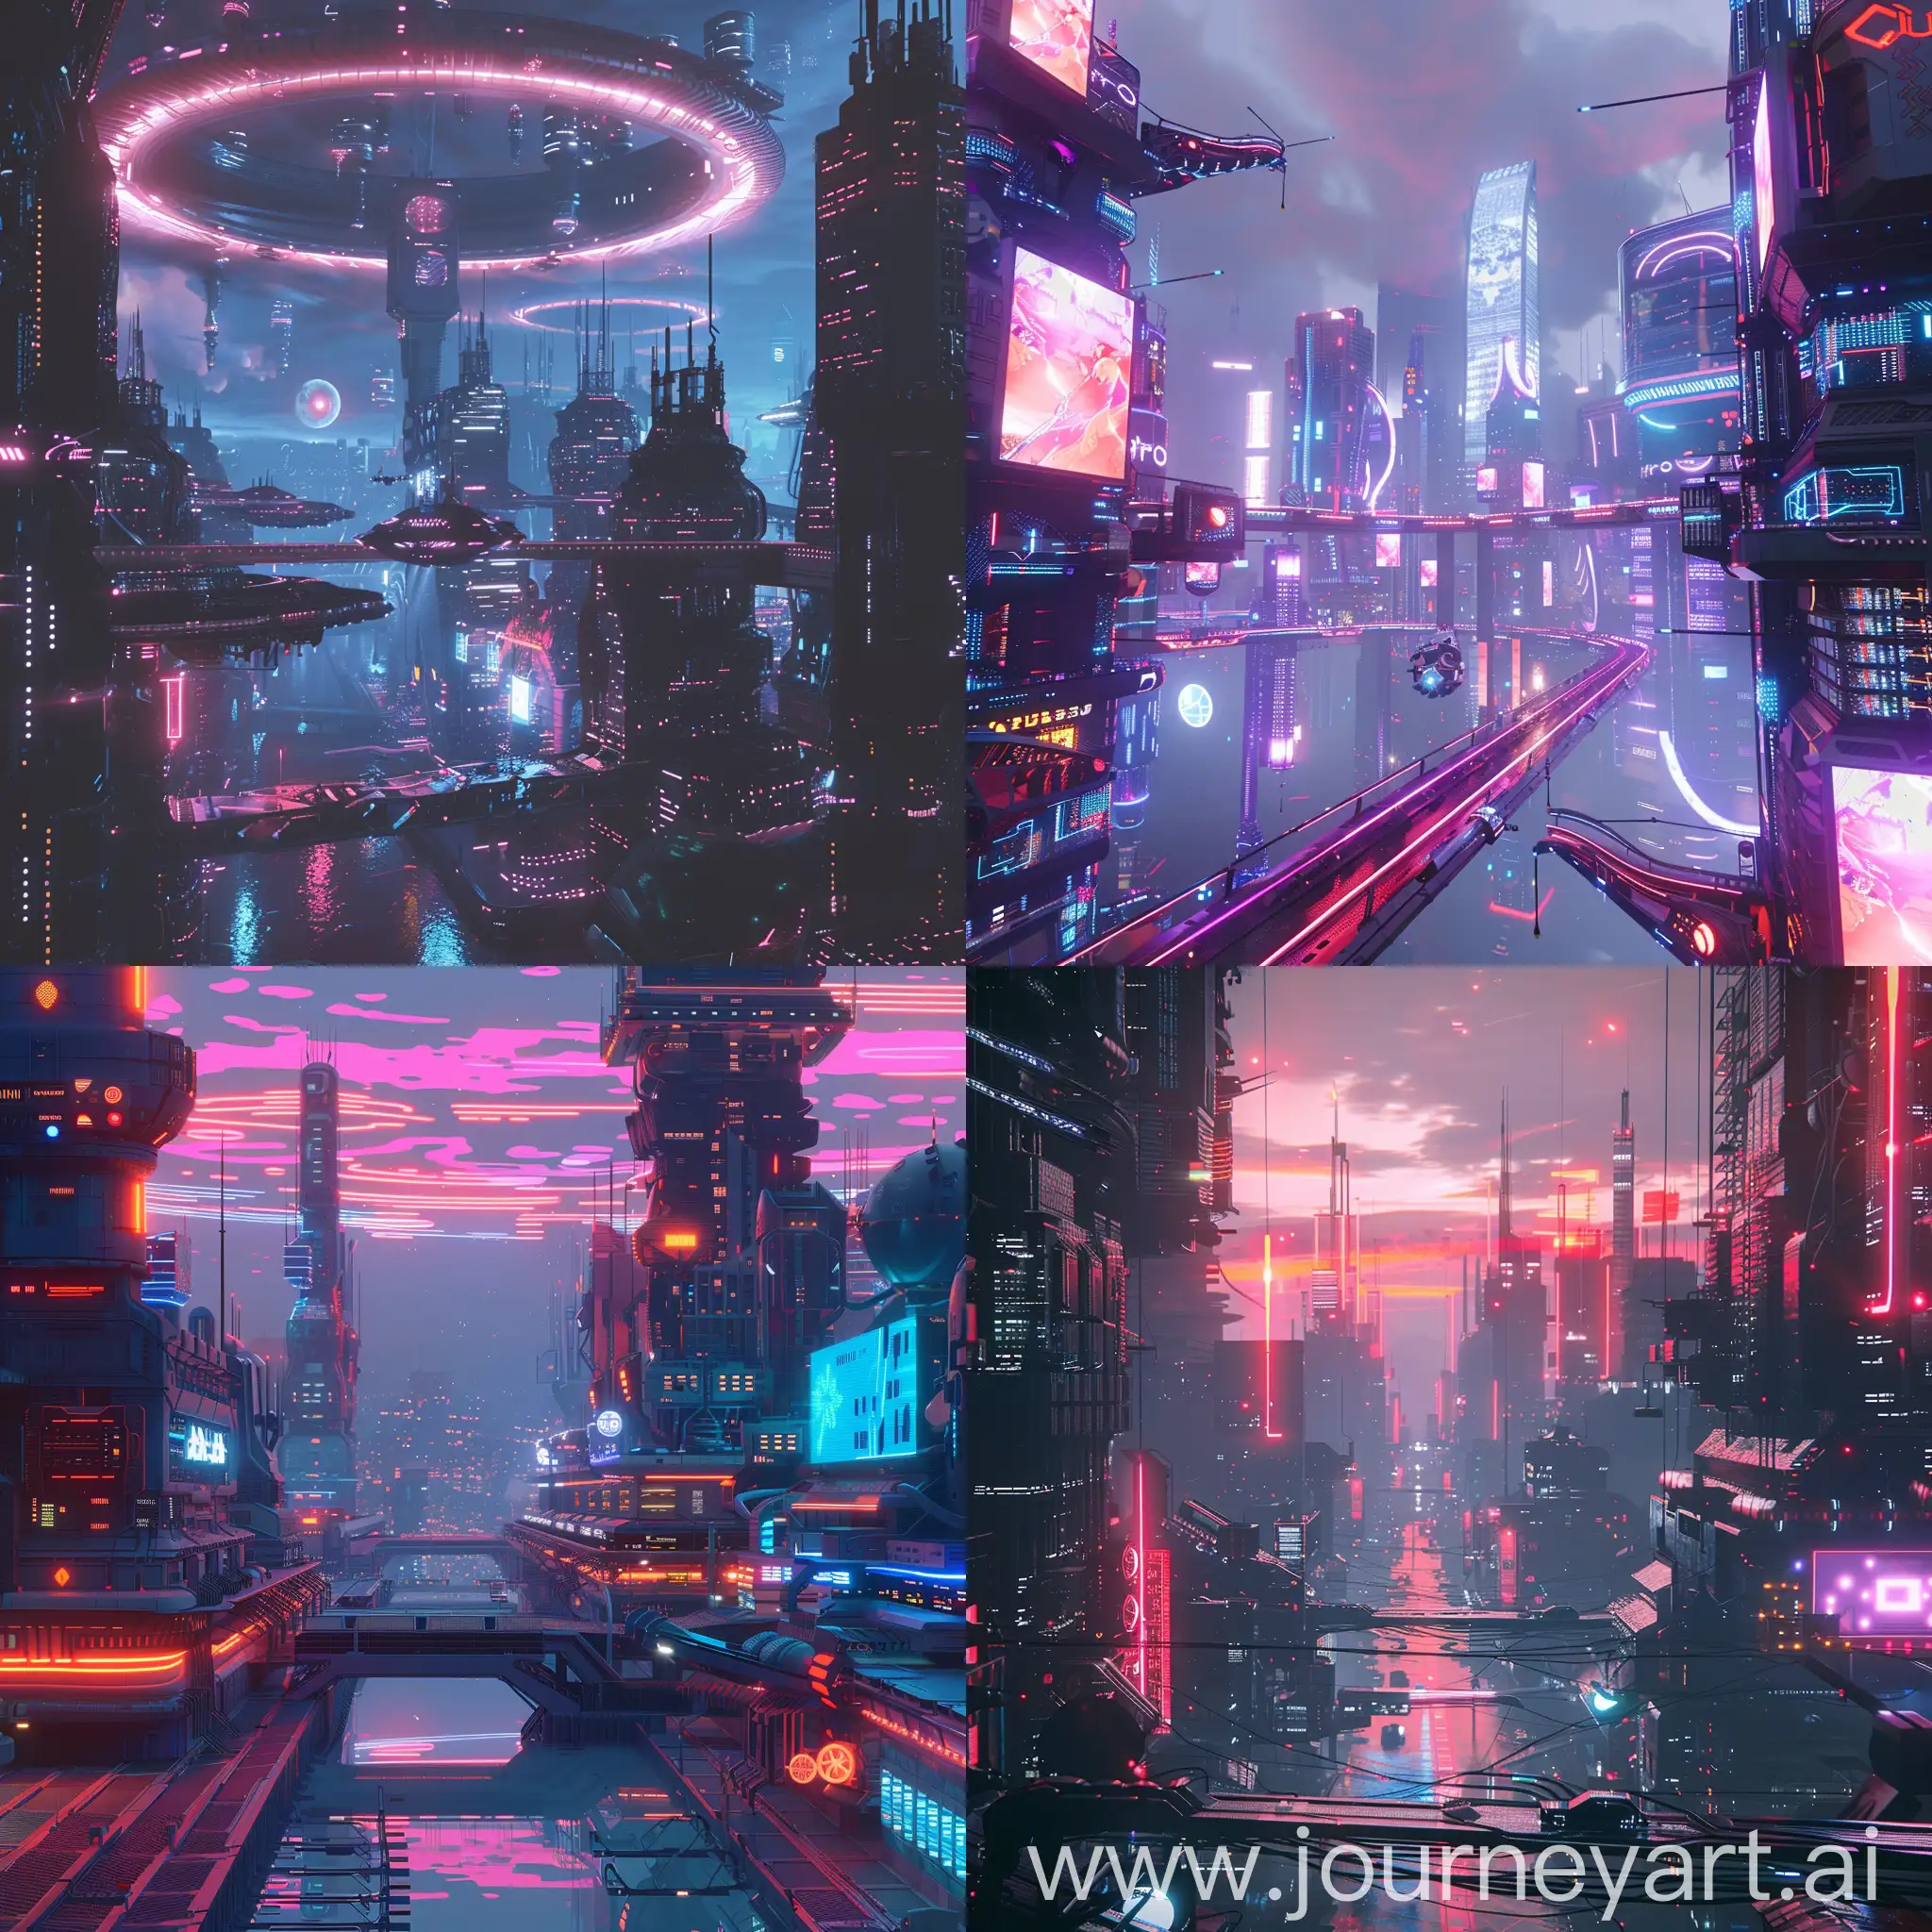 synthwave style, futuristic city